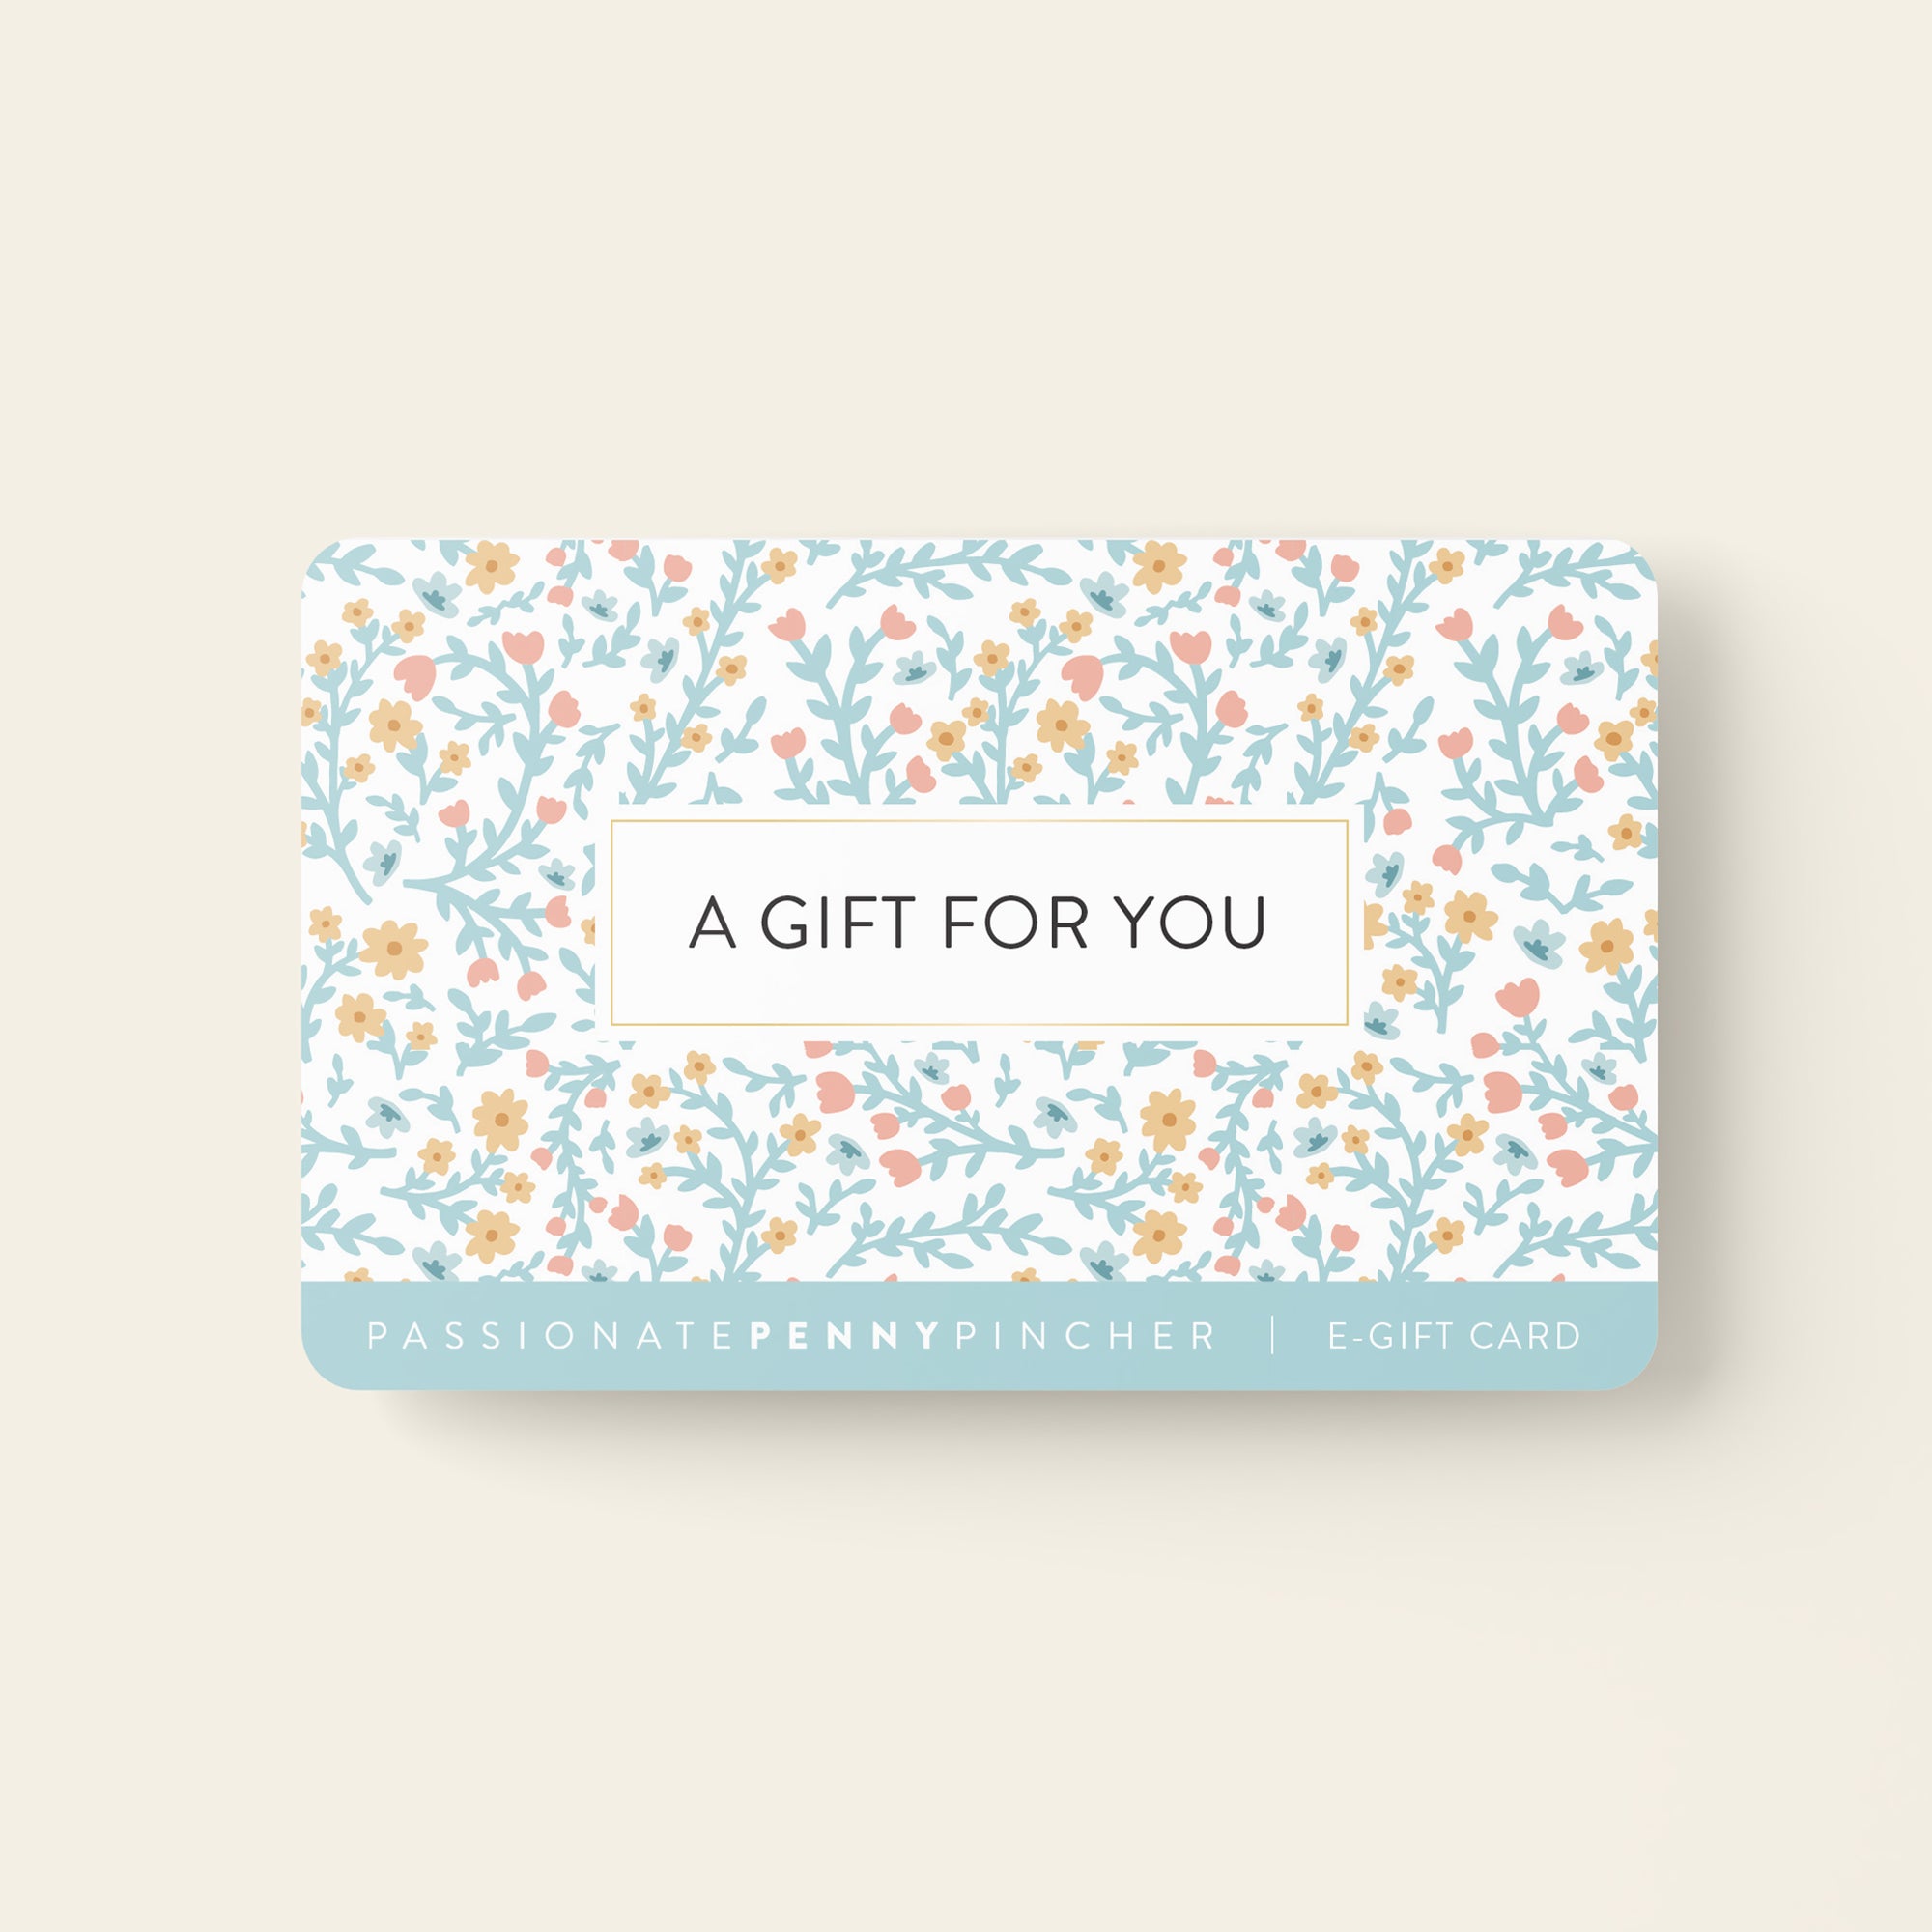 passionate penny pincher e-gift card